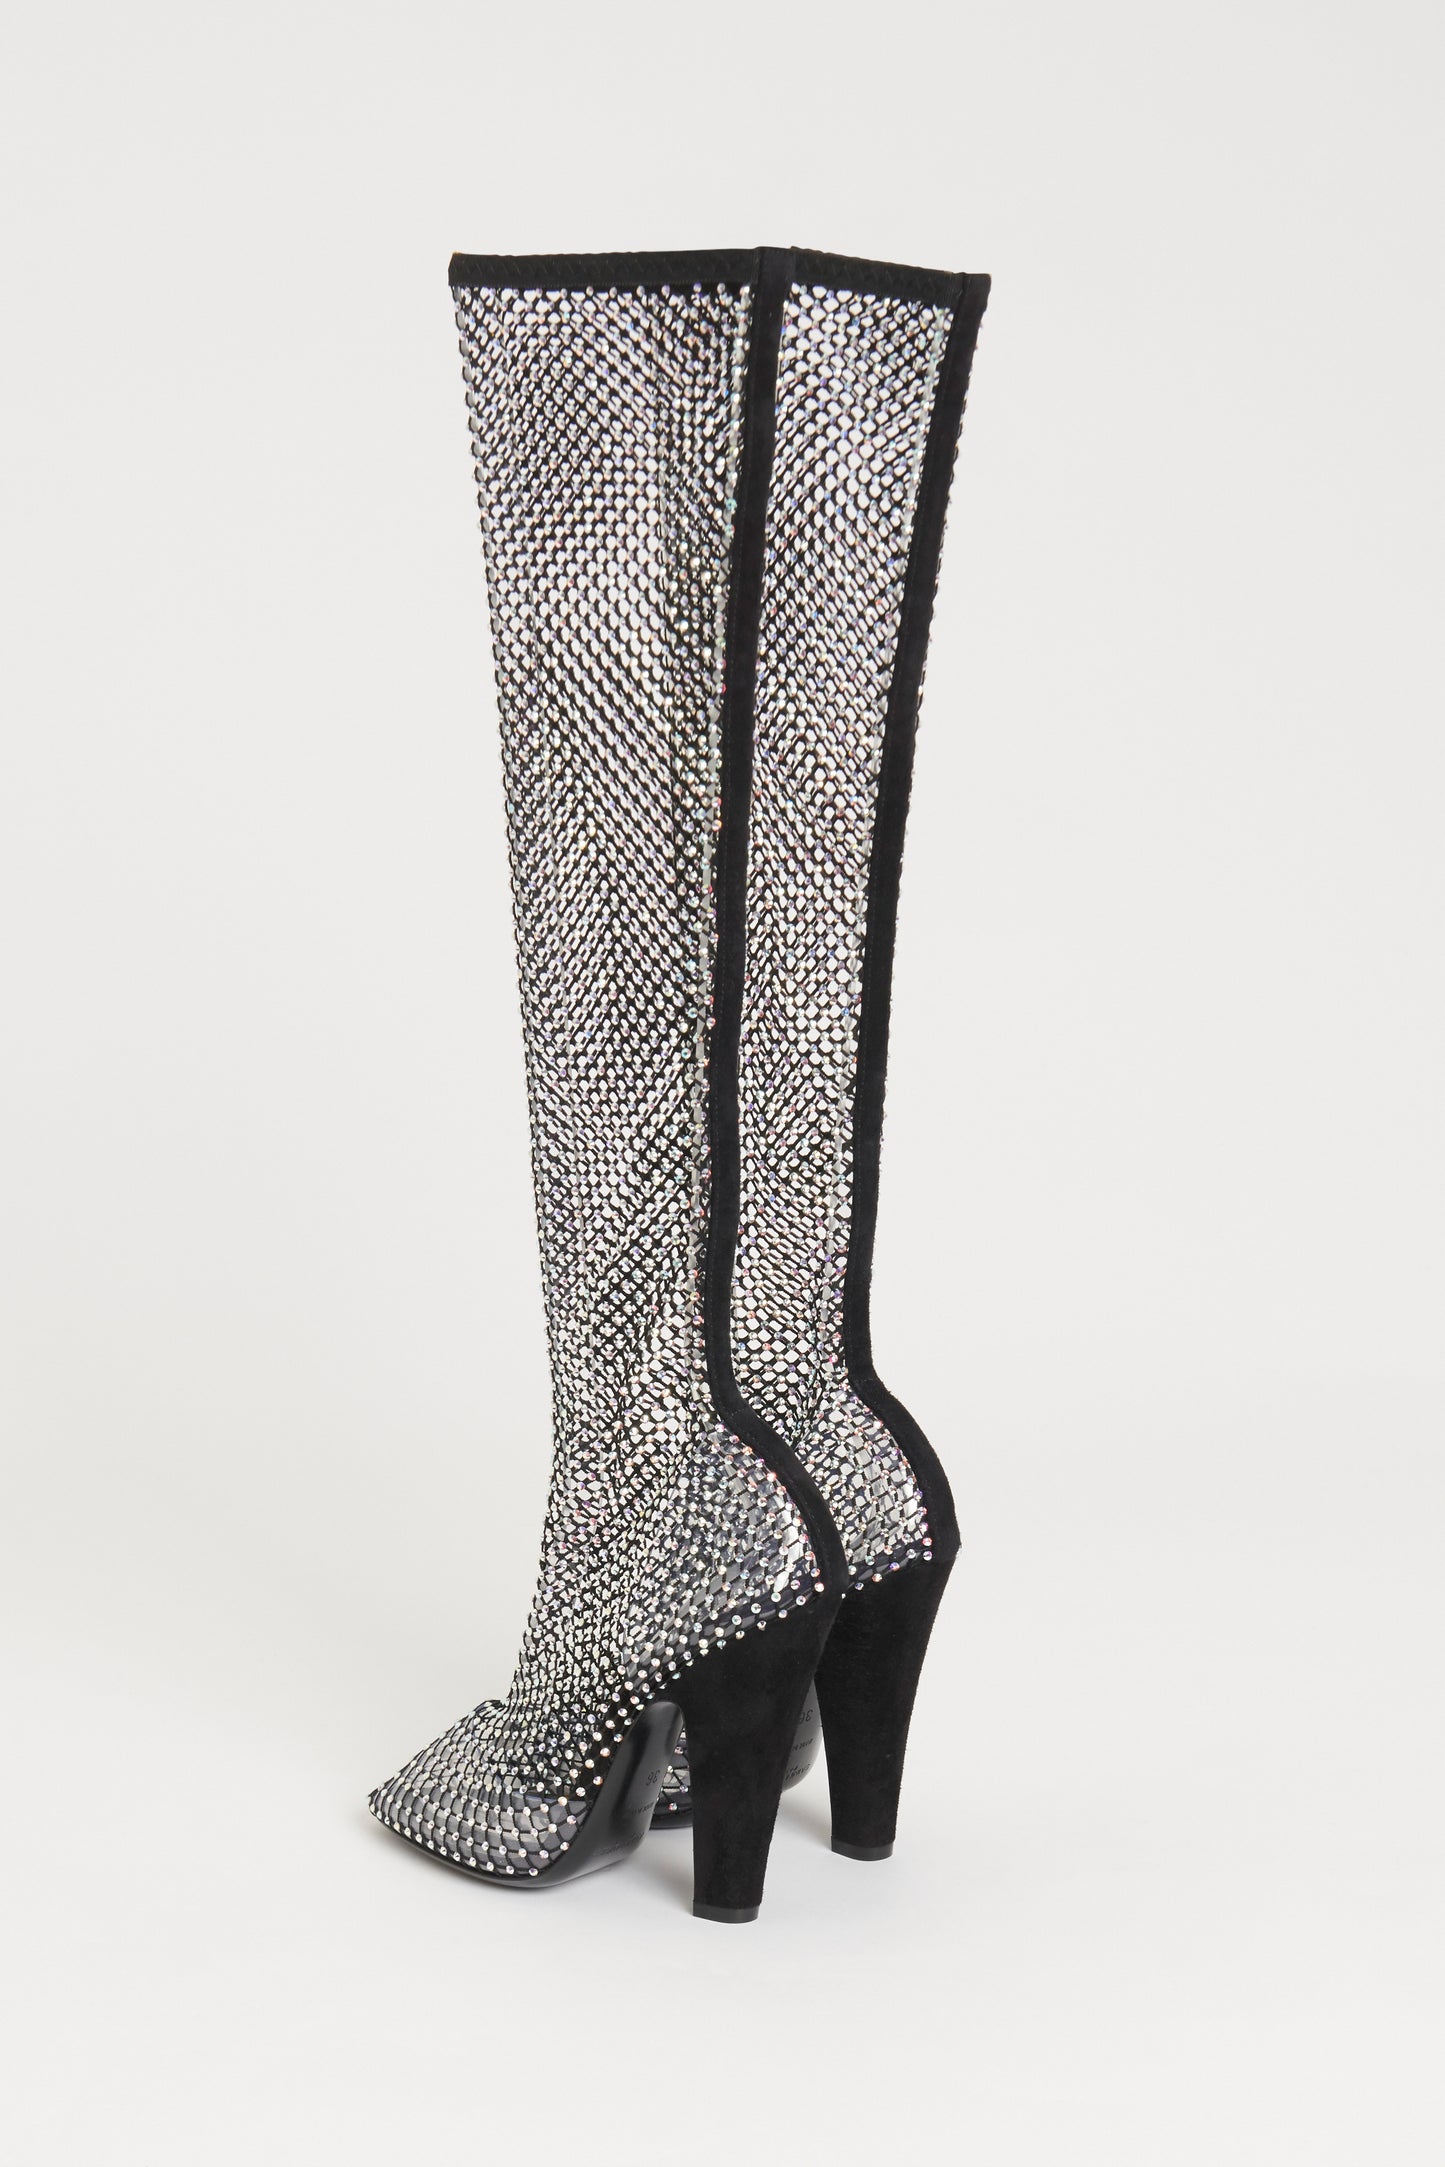 Black Mesh Preowned 68 Diamante Over the Knee Boots